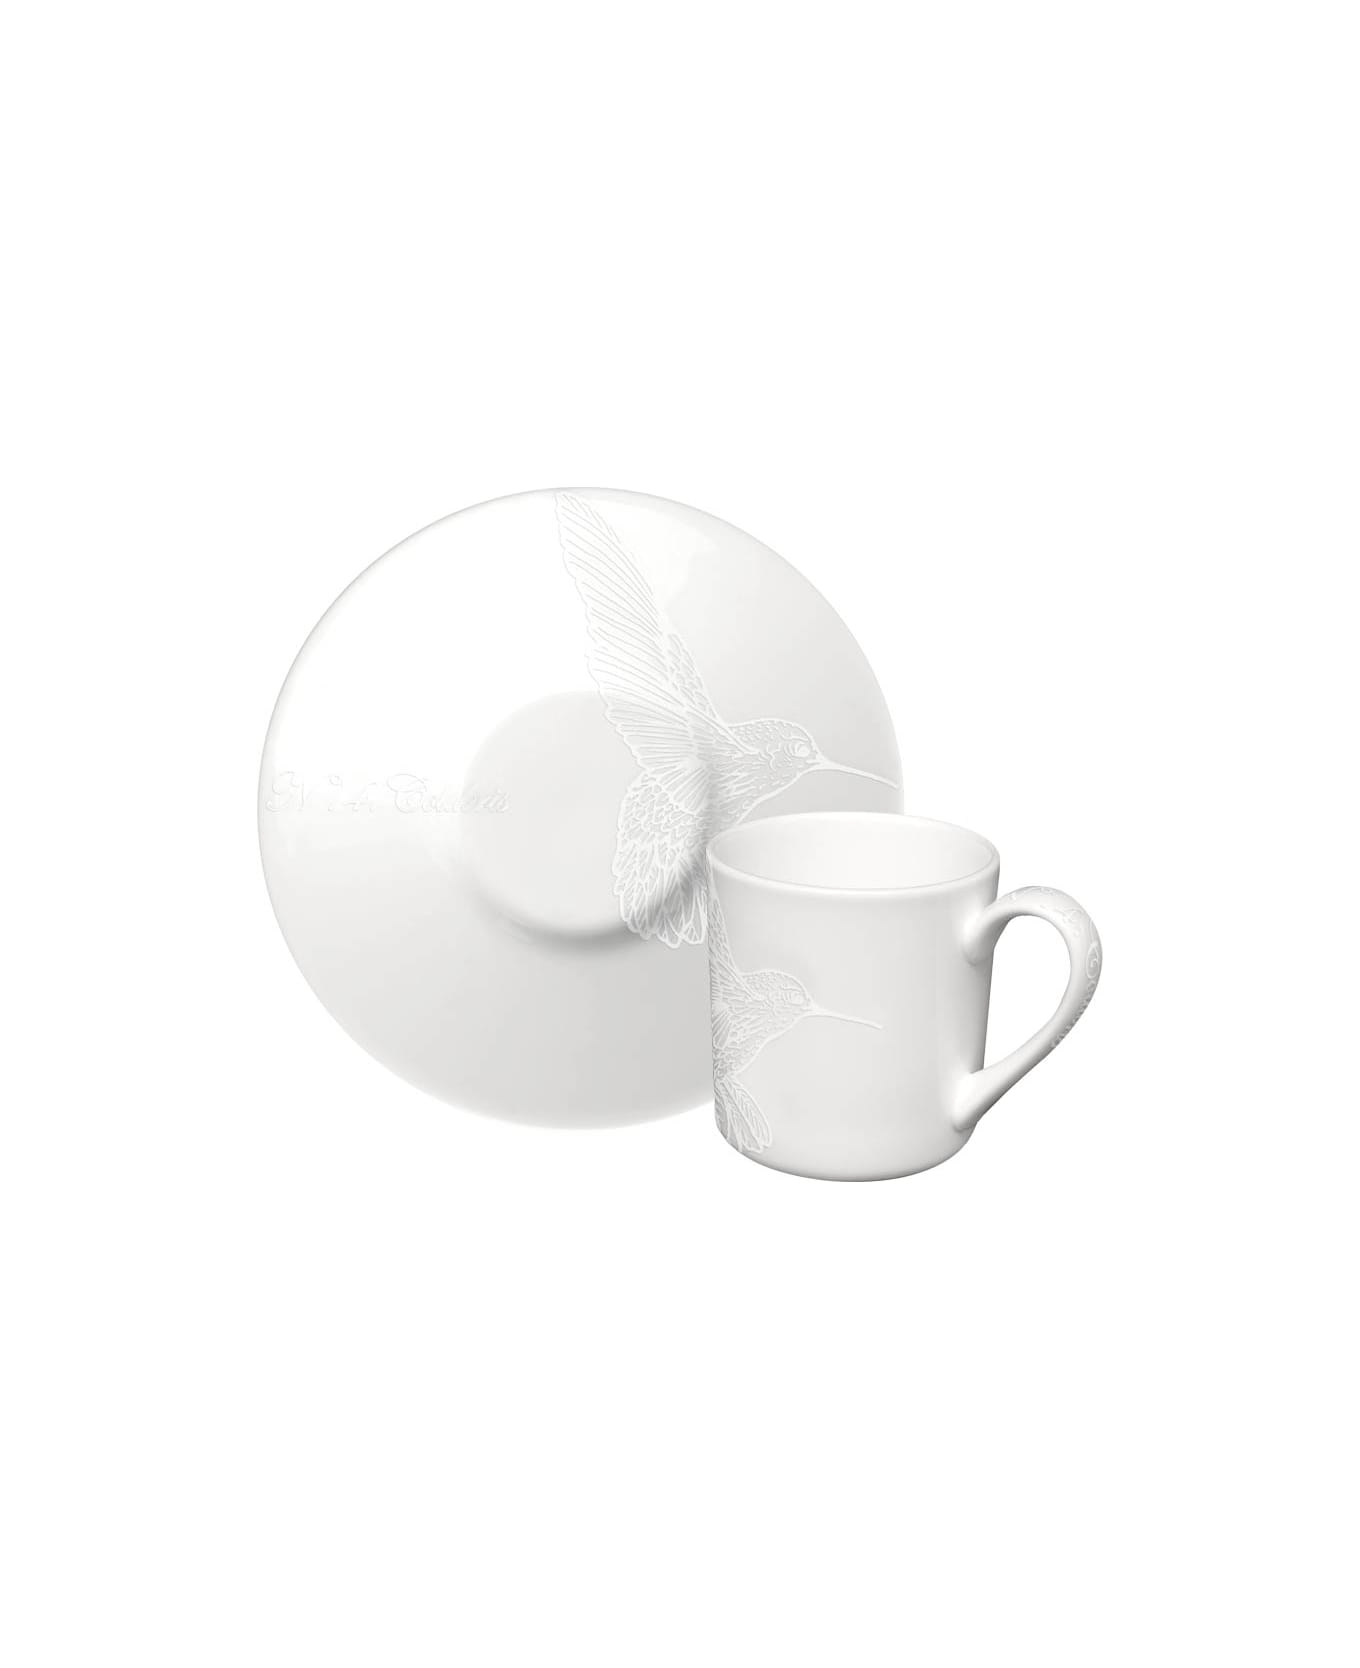 Taitù Set of 4 Espresso Cups & Saucers - Bianco&Bianco Collection - White